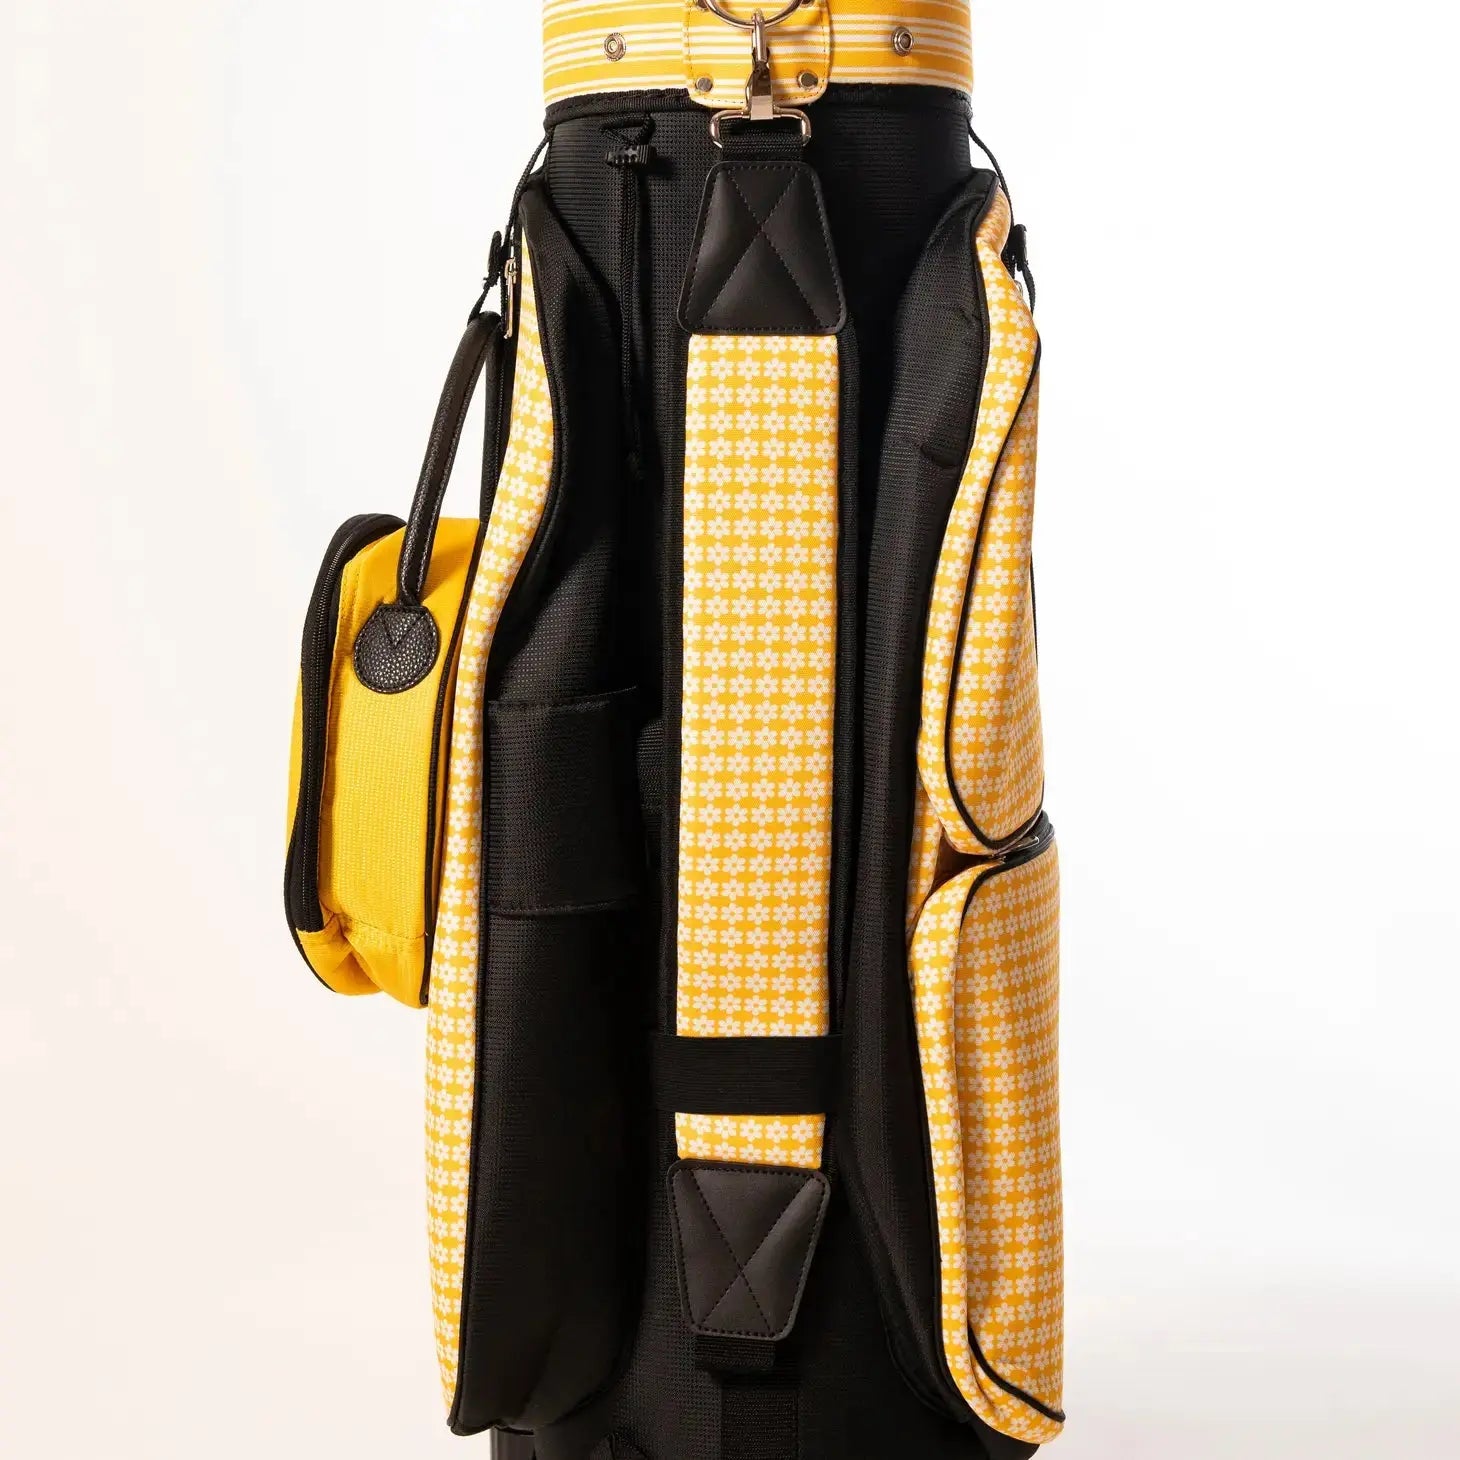 Daisy Golf Cart Bag- Runway Athletics. Playful daisy print, along with our black honeycomb fabric. The shoulder strap is located at back of bag